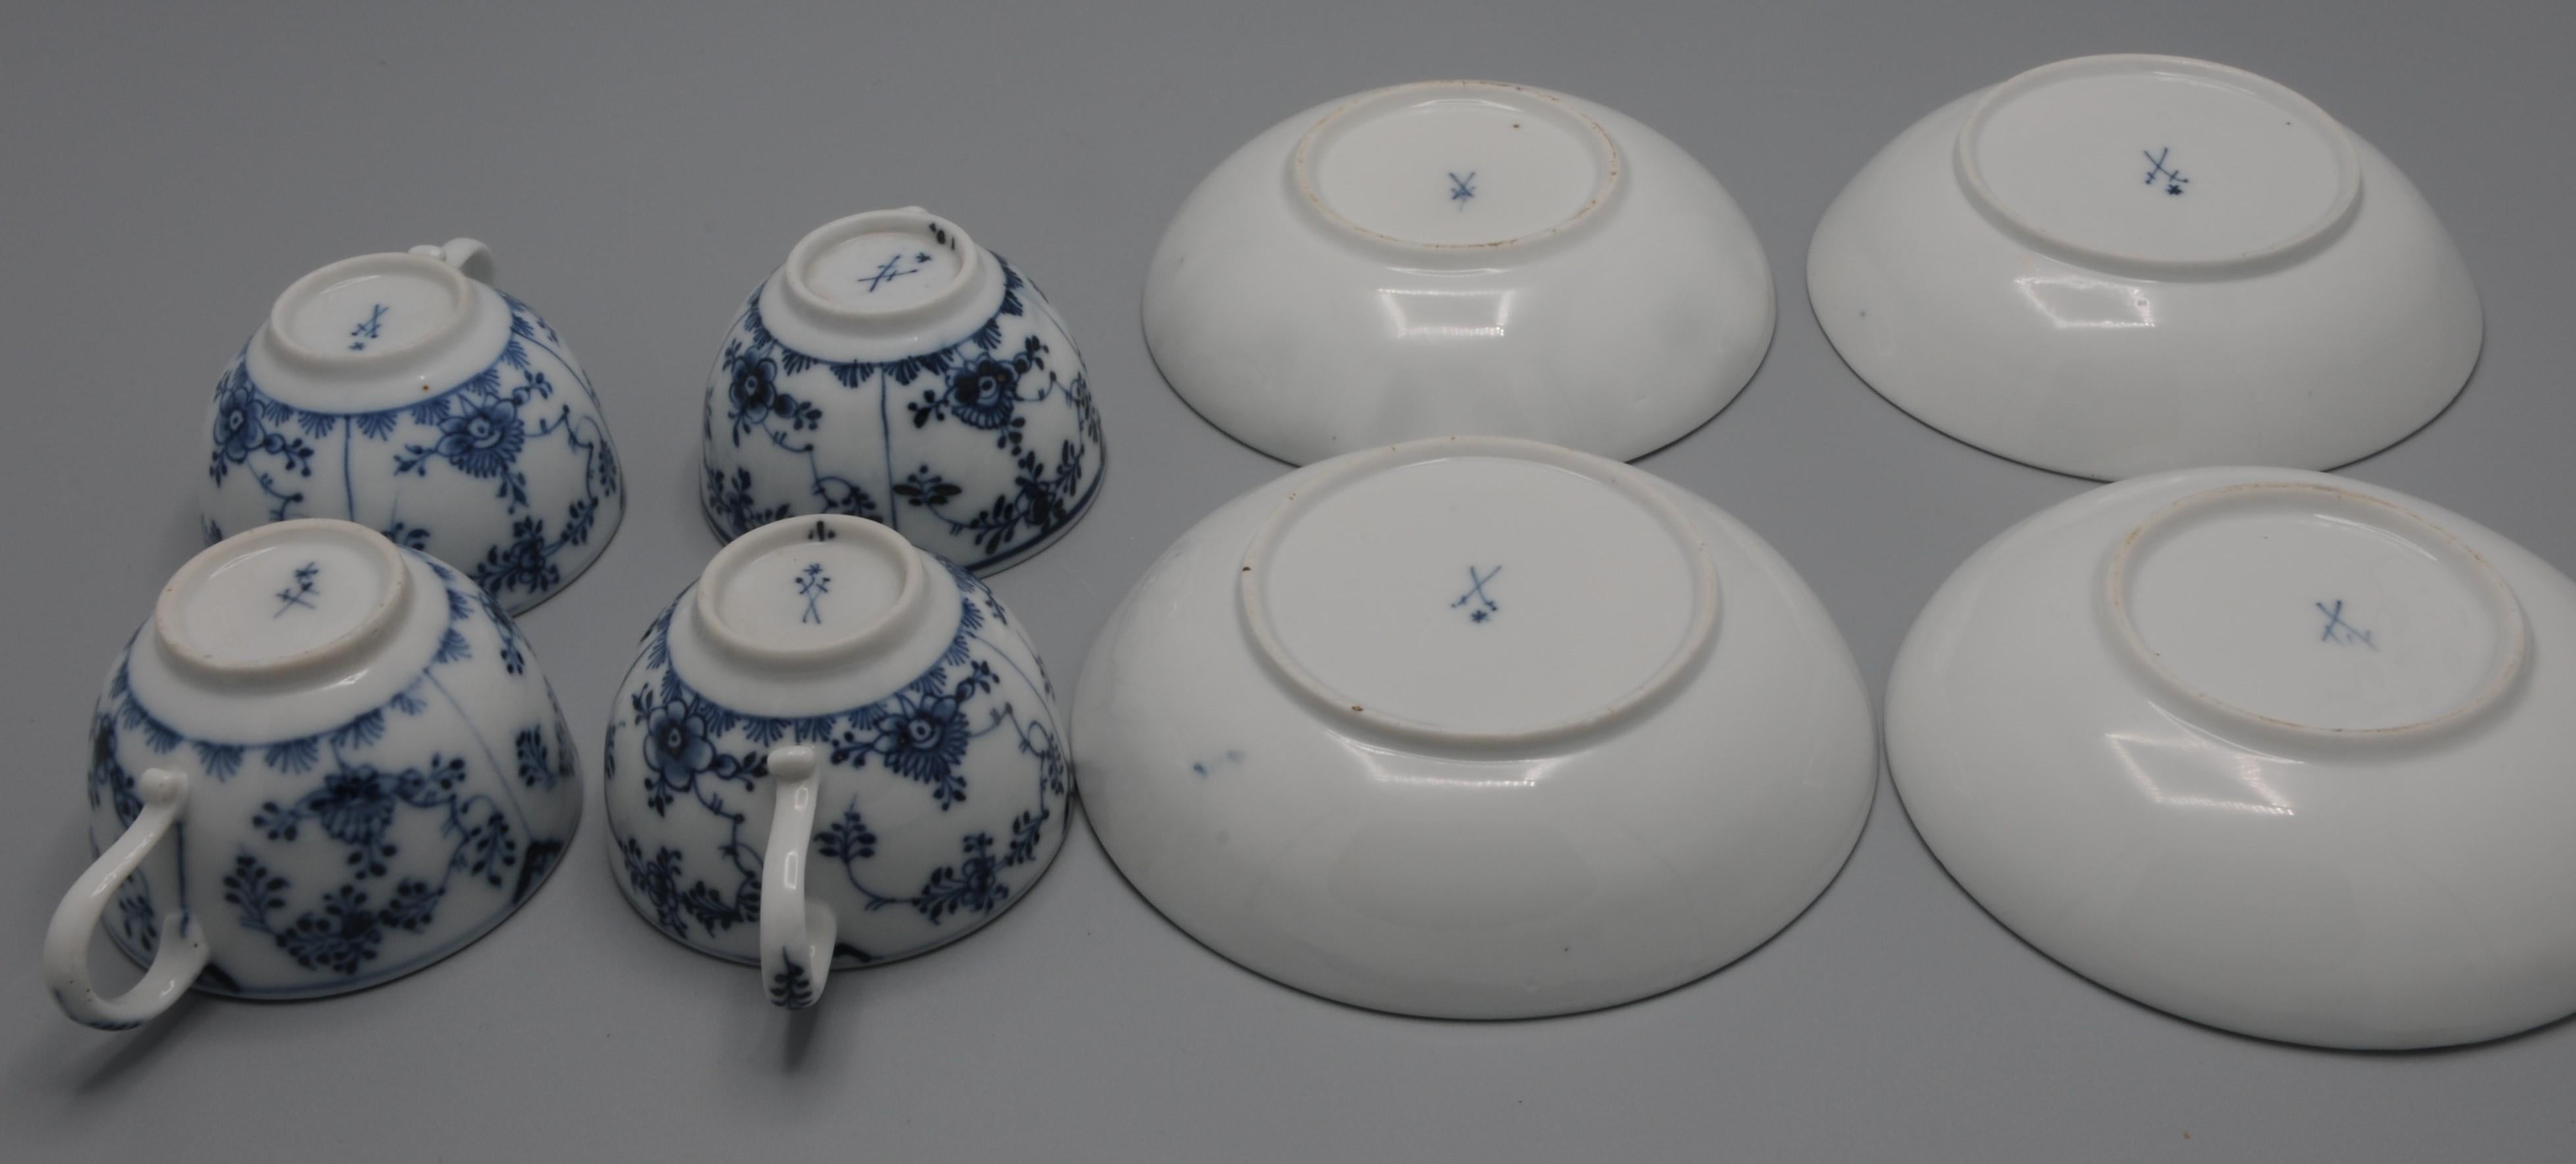 Meissen - 4 cups and saucers 'Strohblumenmuster', Marcolini period 1774-1814 In Good Condition For Sale In DELFT, NL